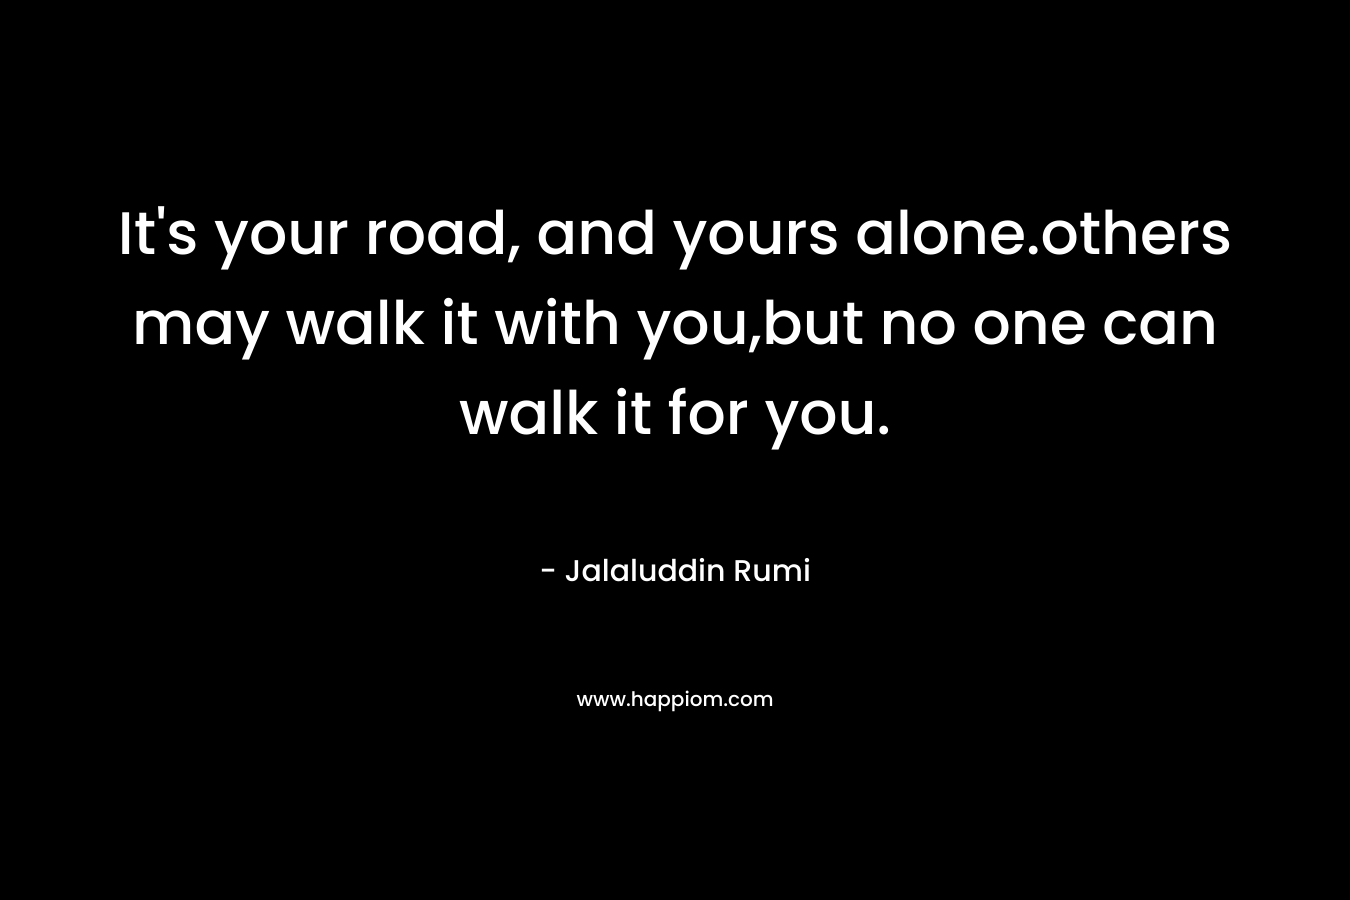 It’s your road, and yours alone.others may walk it with you,but no one can walk it for you. – Jalaluddin Rumi